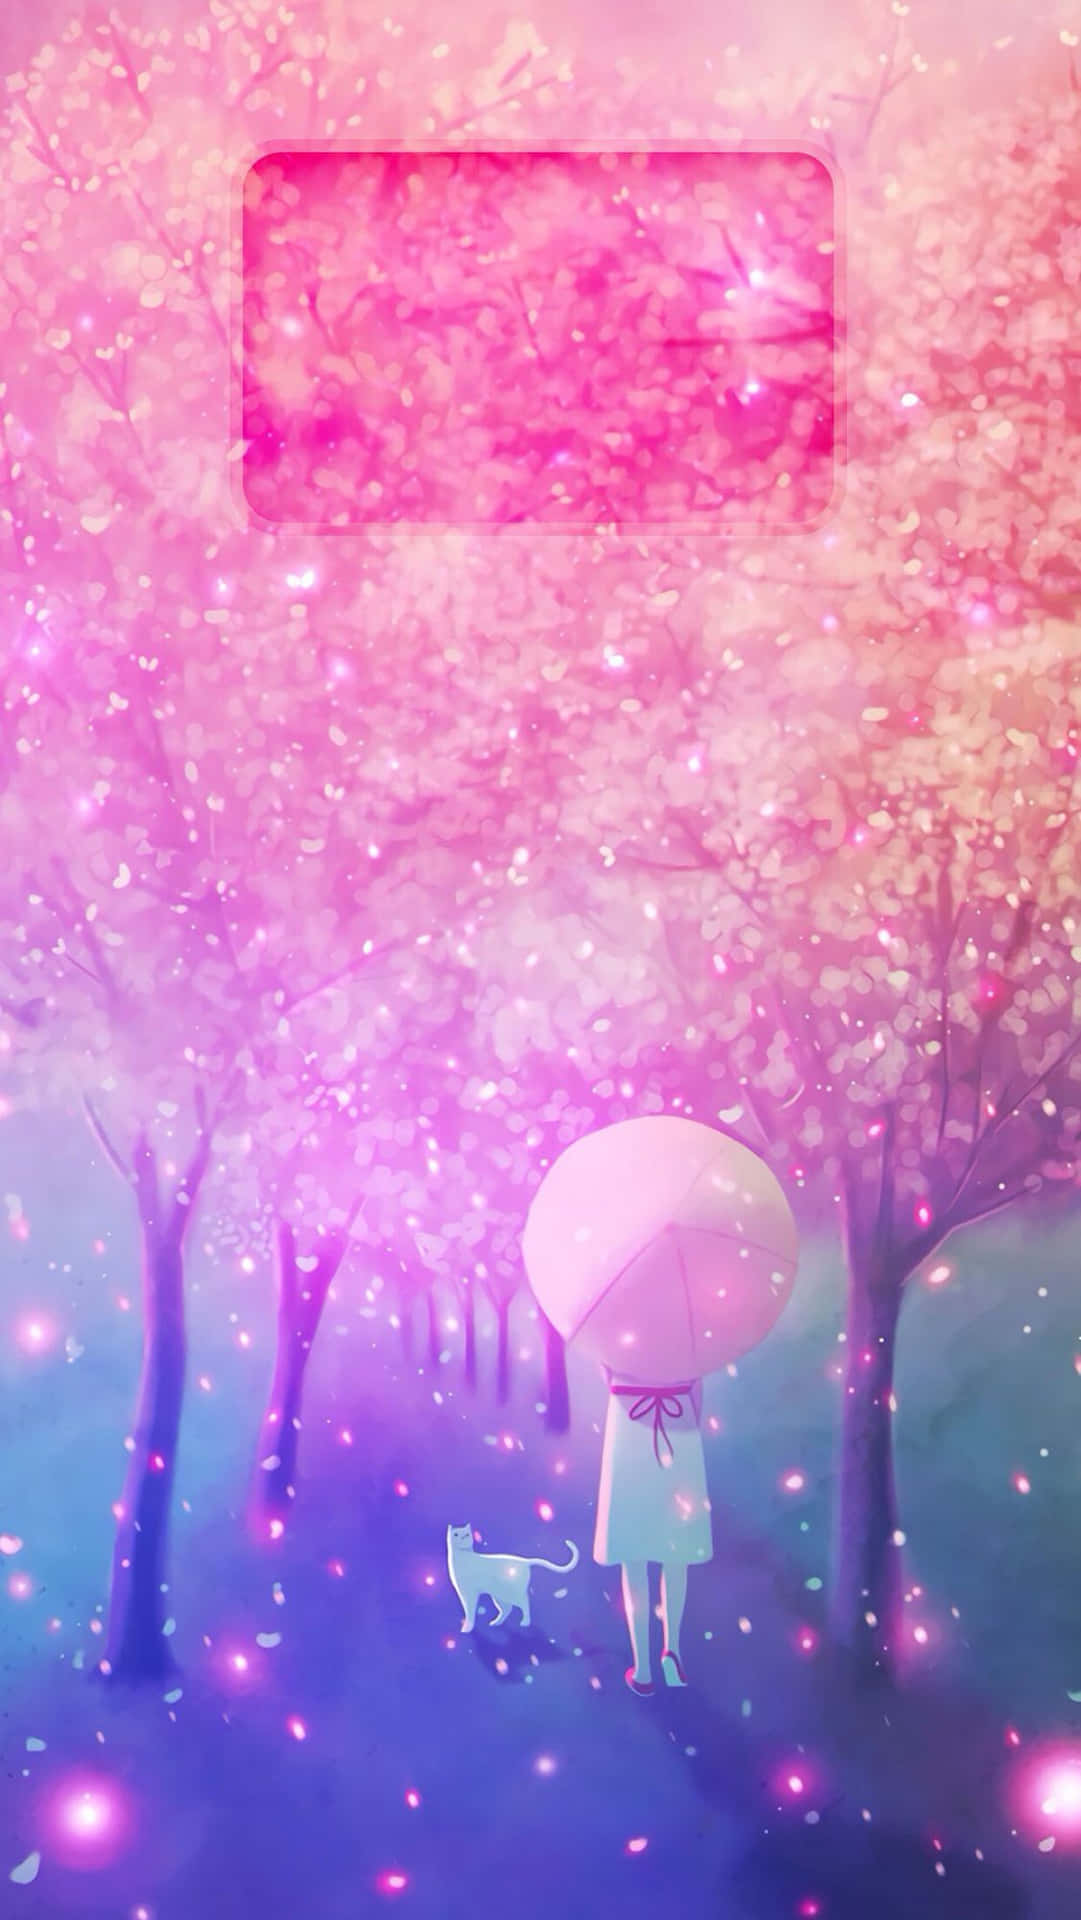 A Girl Is Walking Through A Pink Tree With A Pink Umbrella